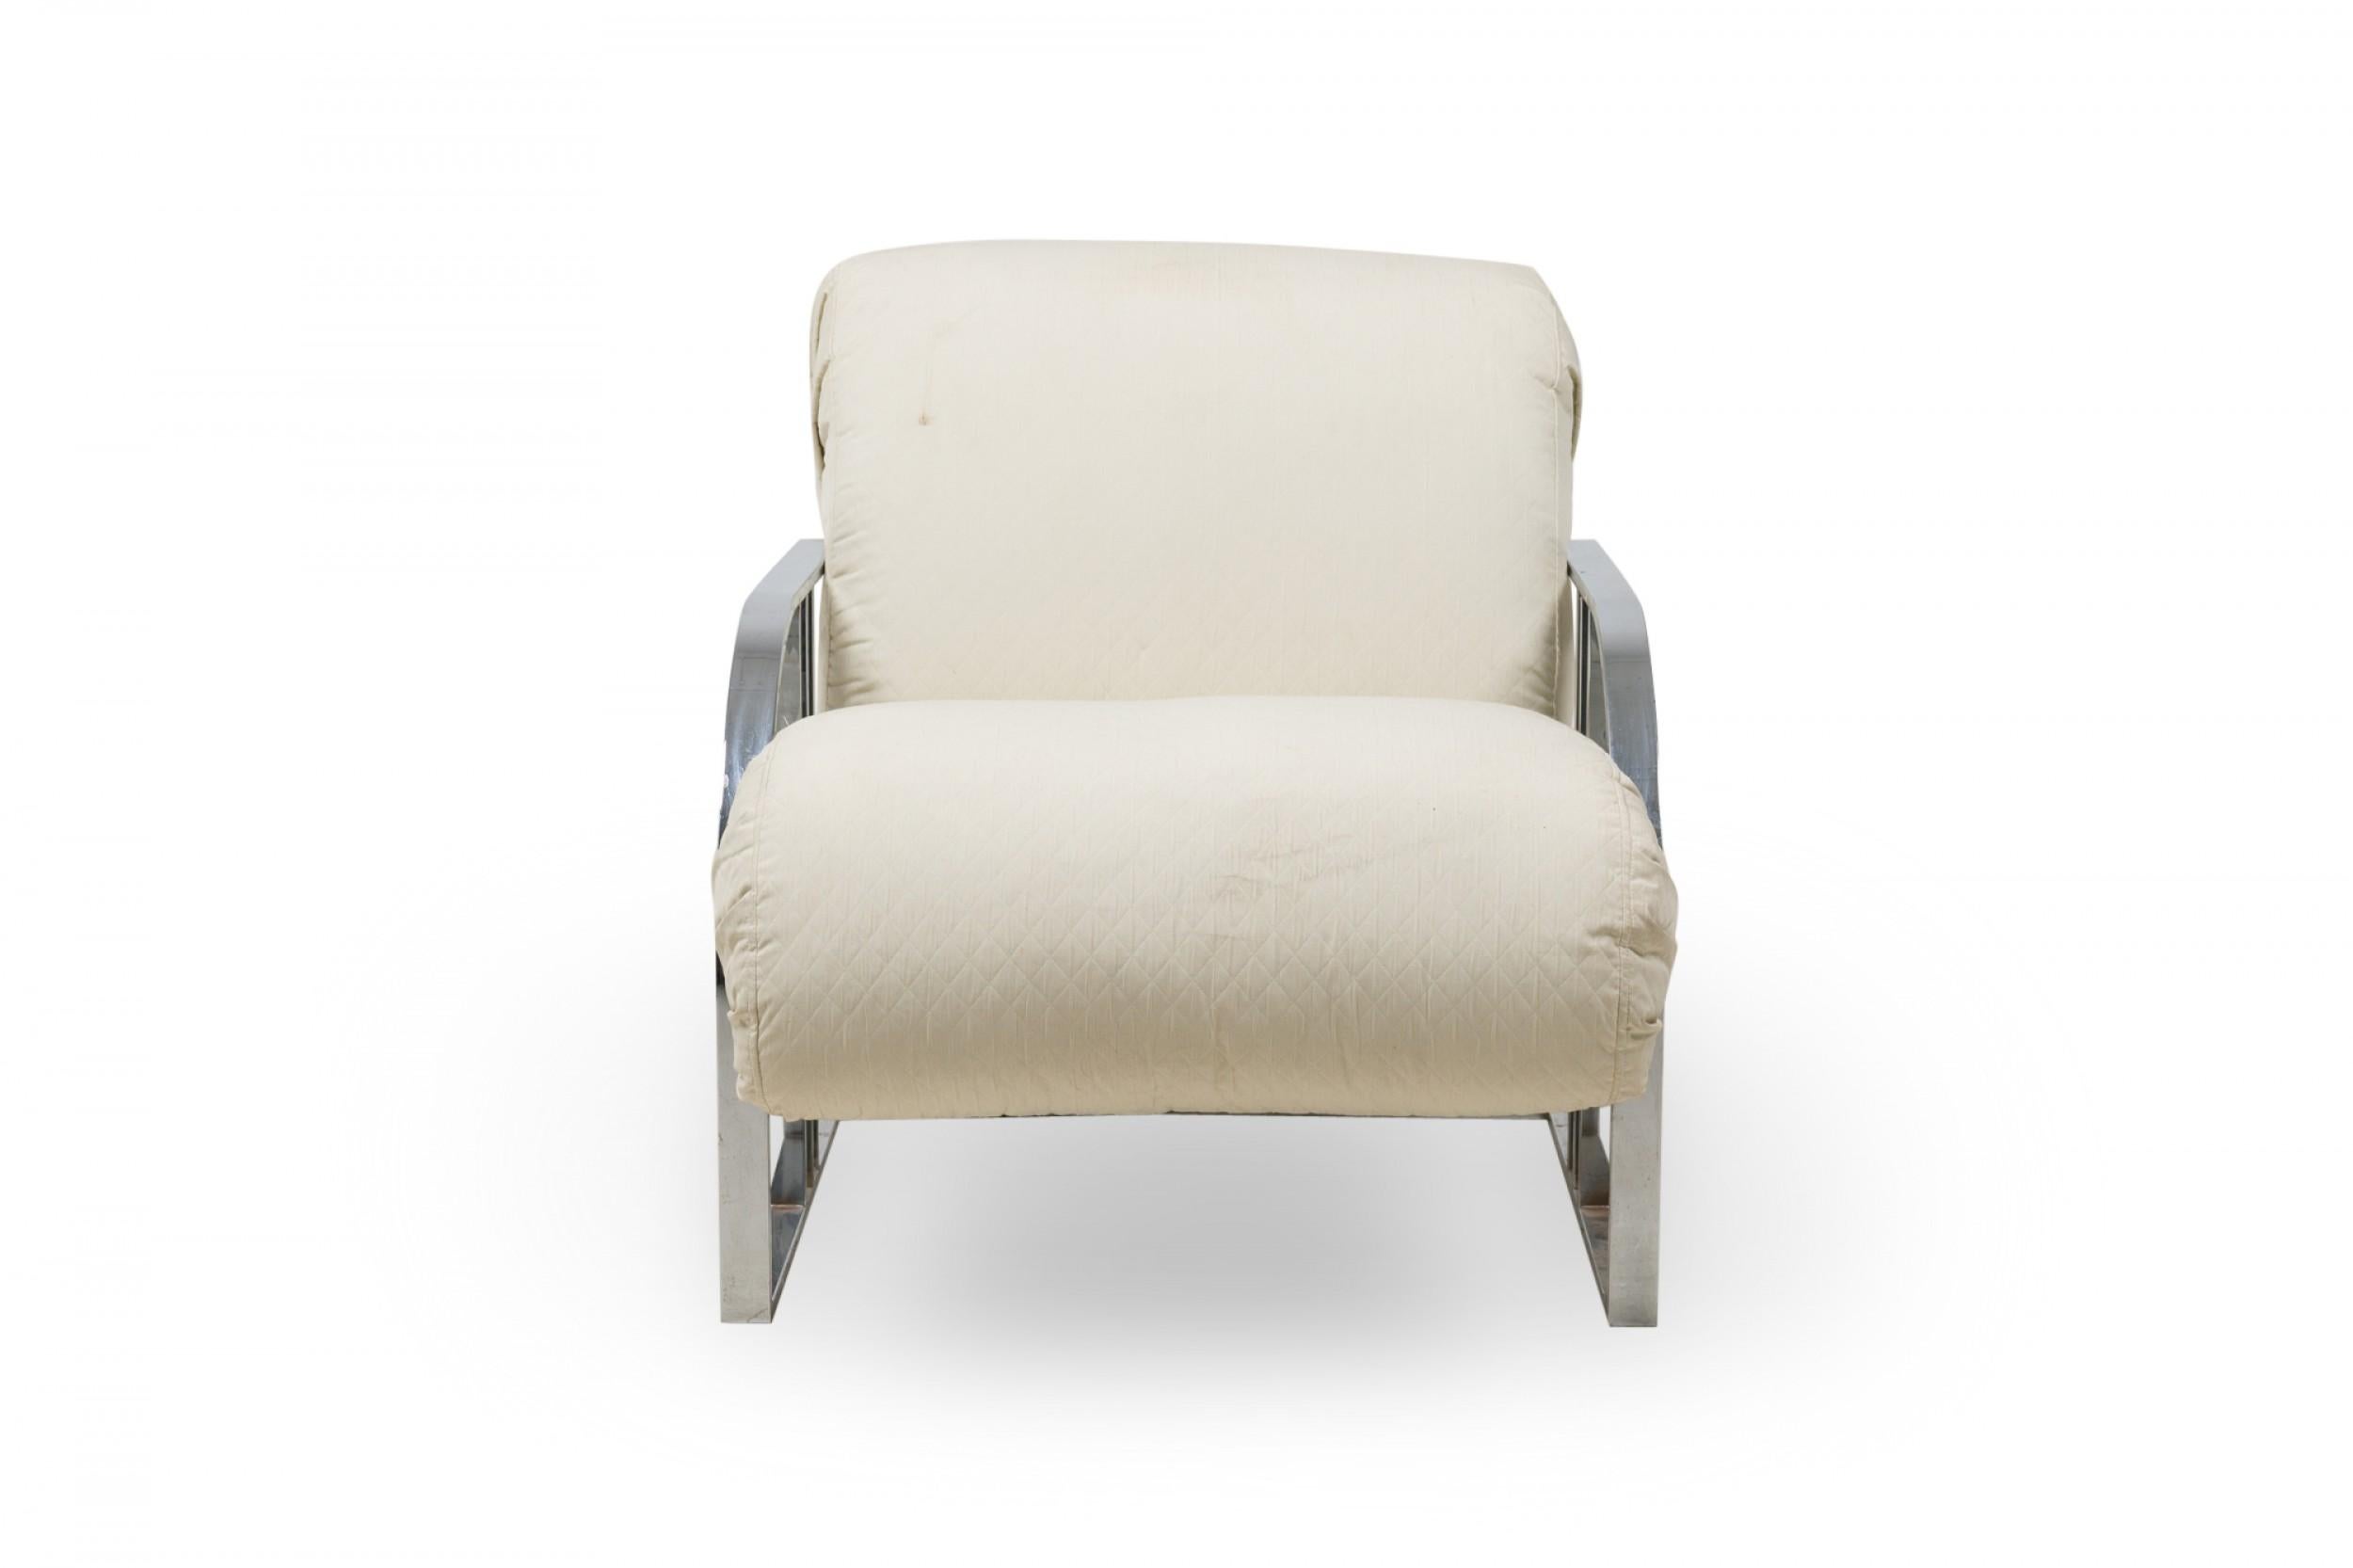 Milo Baughman for Thayer Coggin American Chrome Off-White Upholstered Armchair